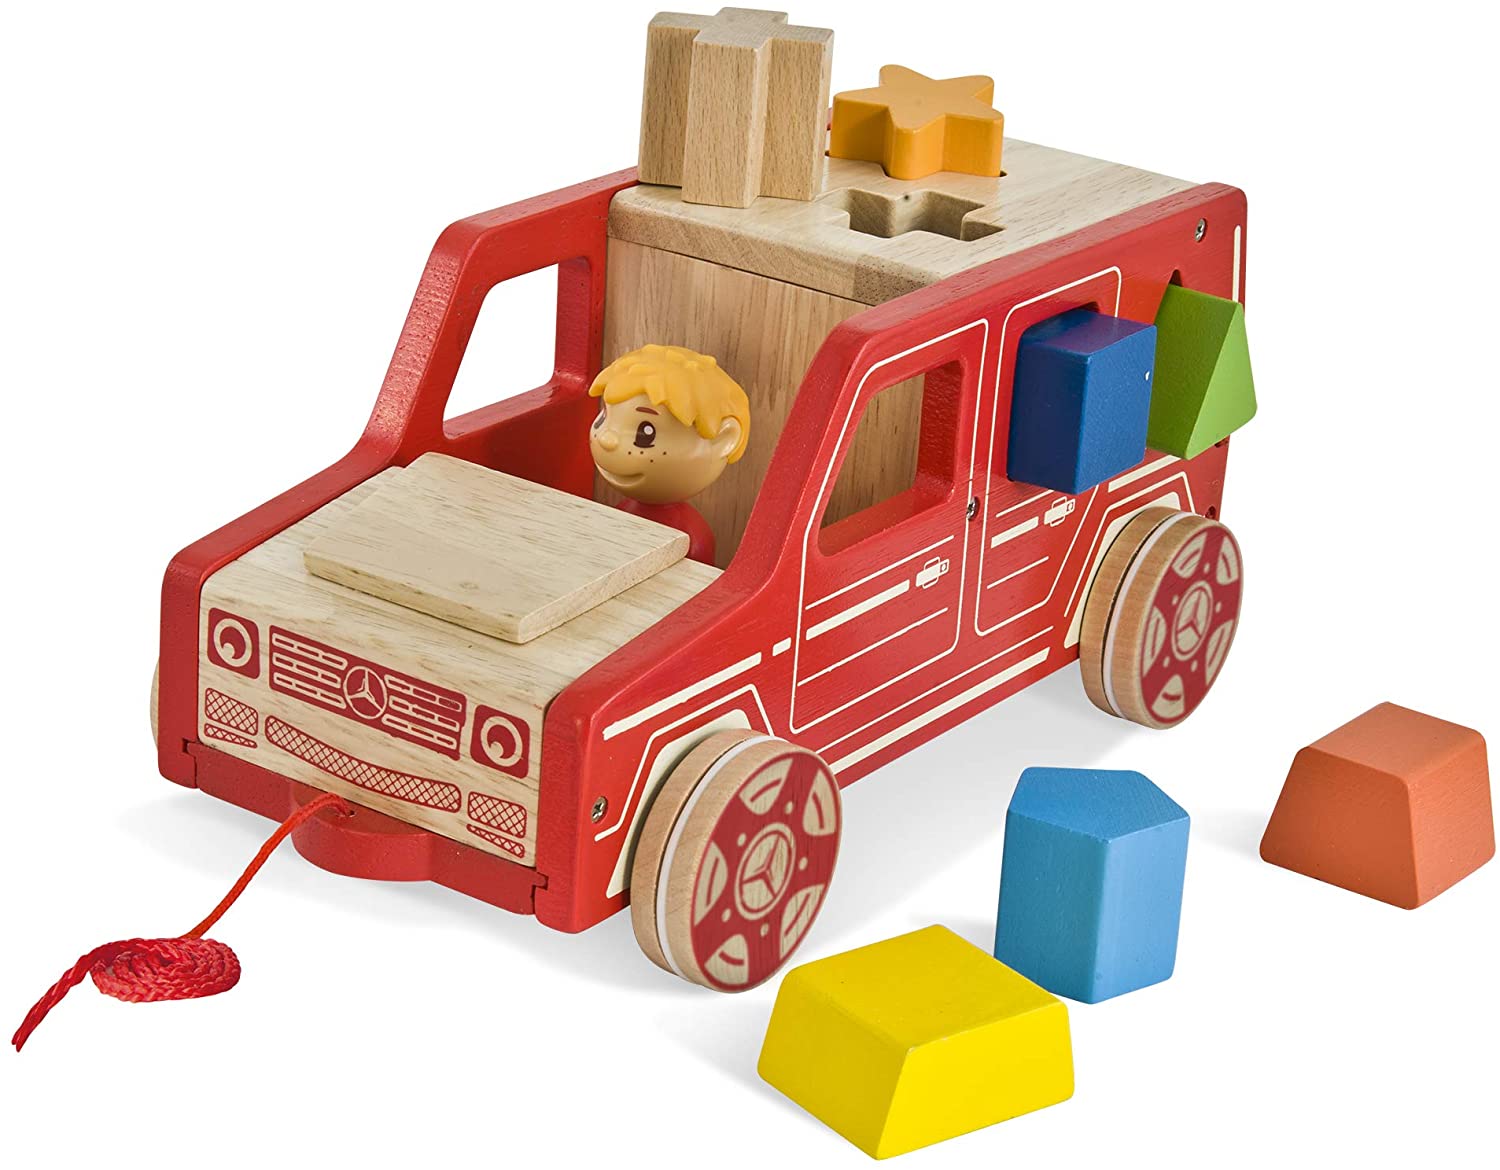 Eichhorn 109475910 Mercedes Steck G-Class Benz Car with 7 Building Blocks and Driver Figure, Shapes, Made from FSC 100% Certified Beech Wood, 24 x 14 cm, from one year